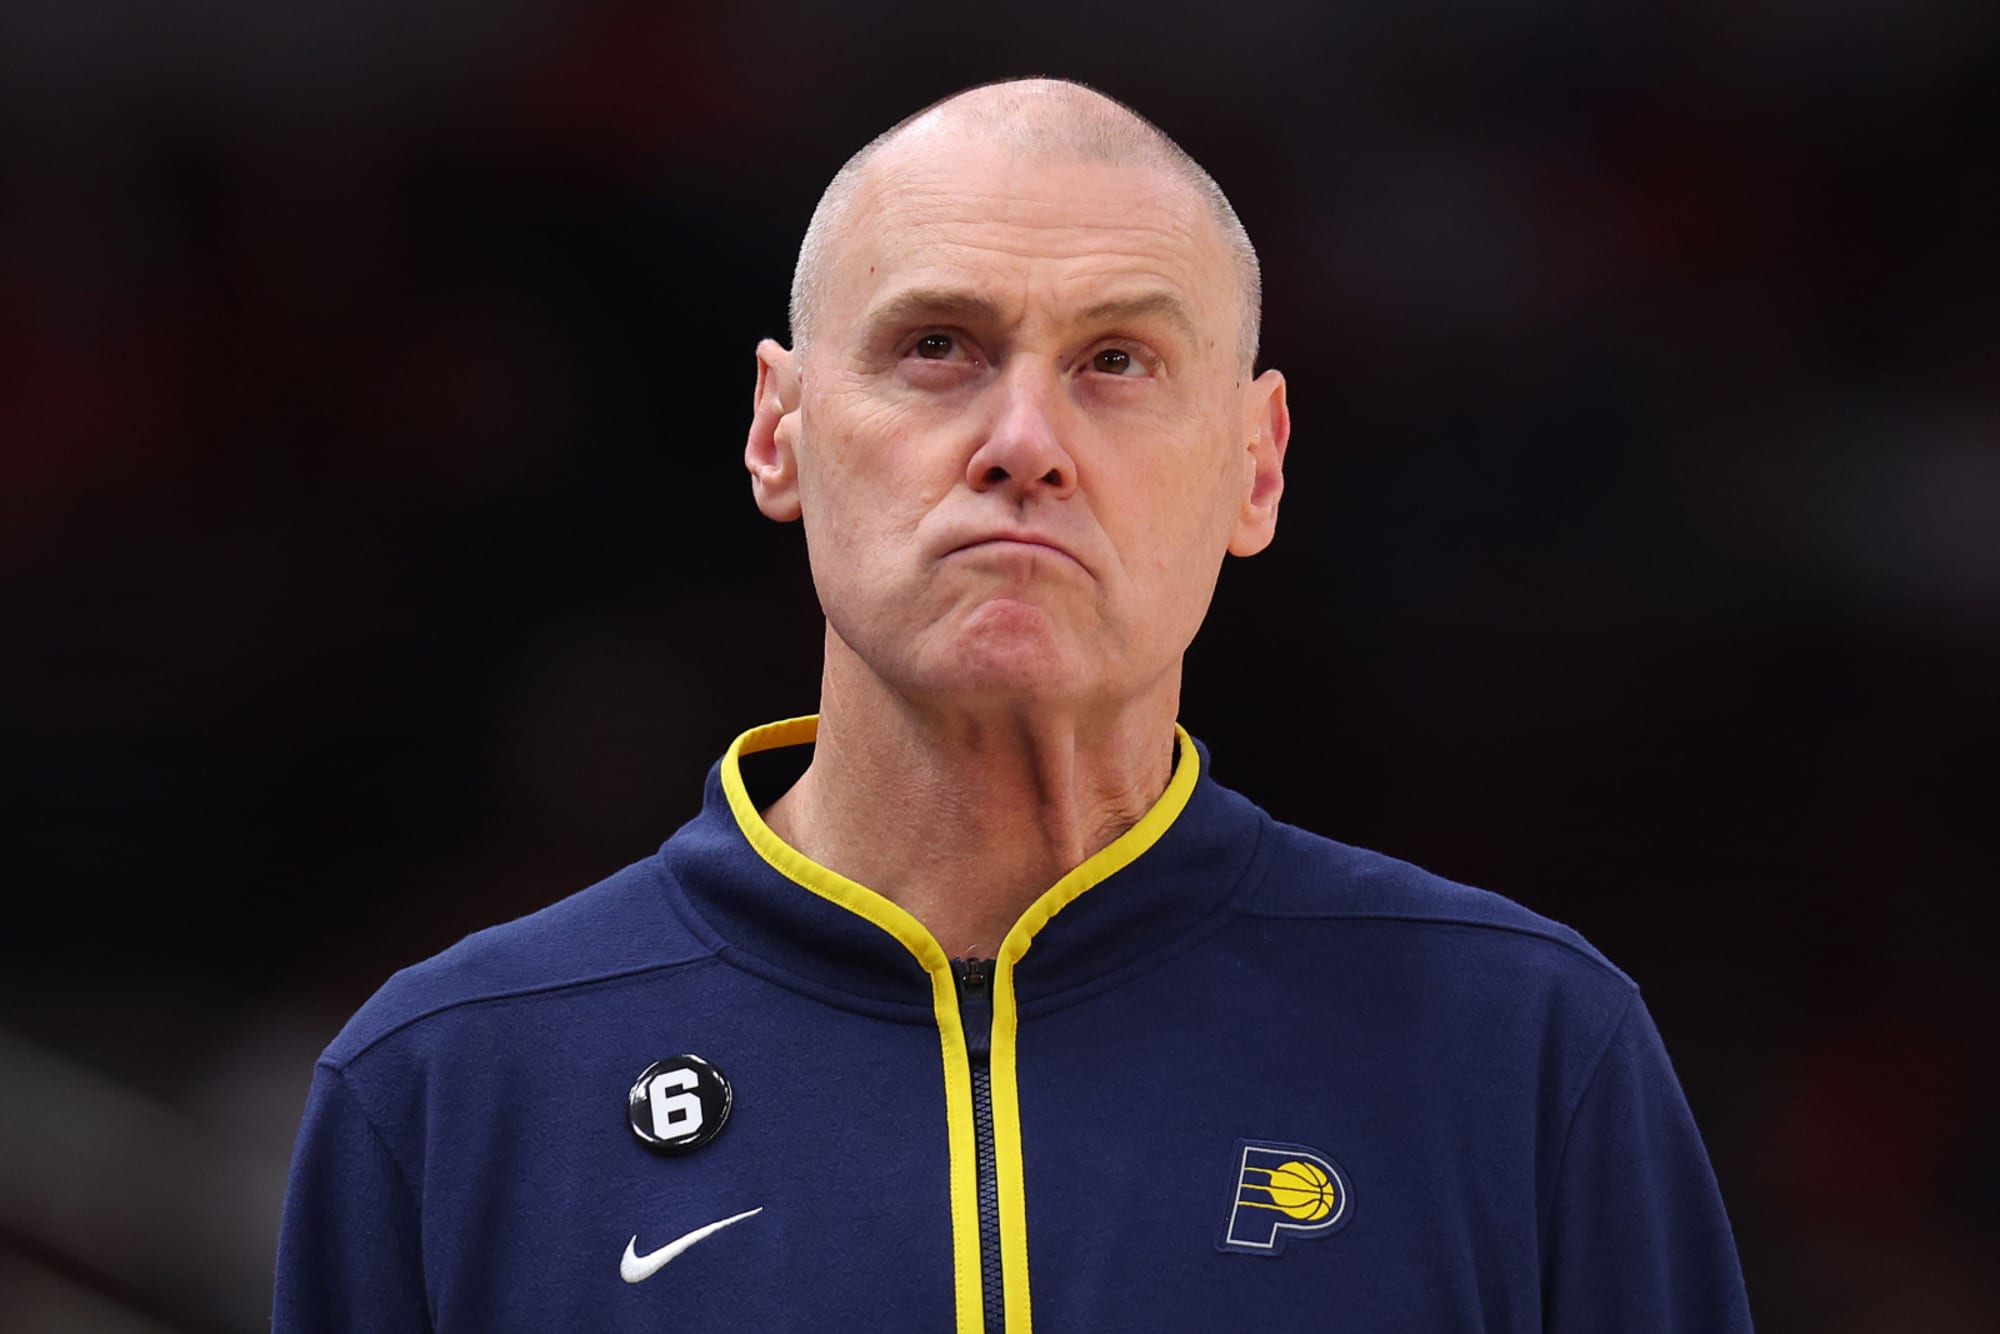 Did you know that this former head coach is now a consultant for the Pacers?